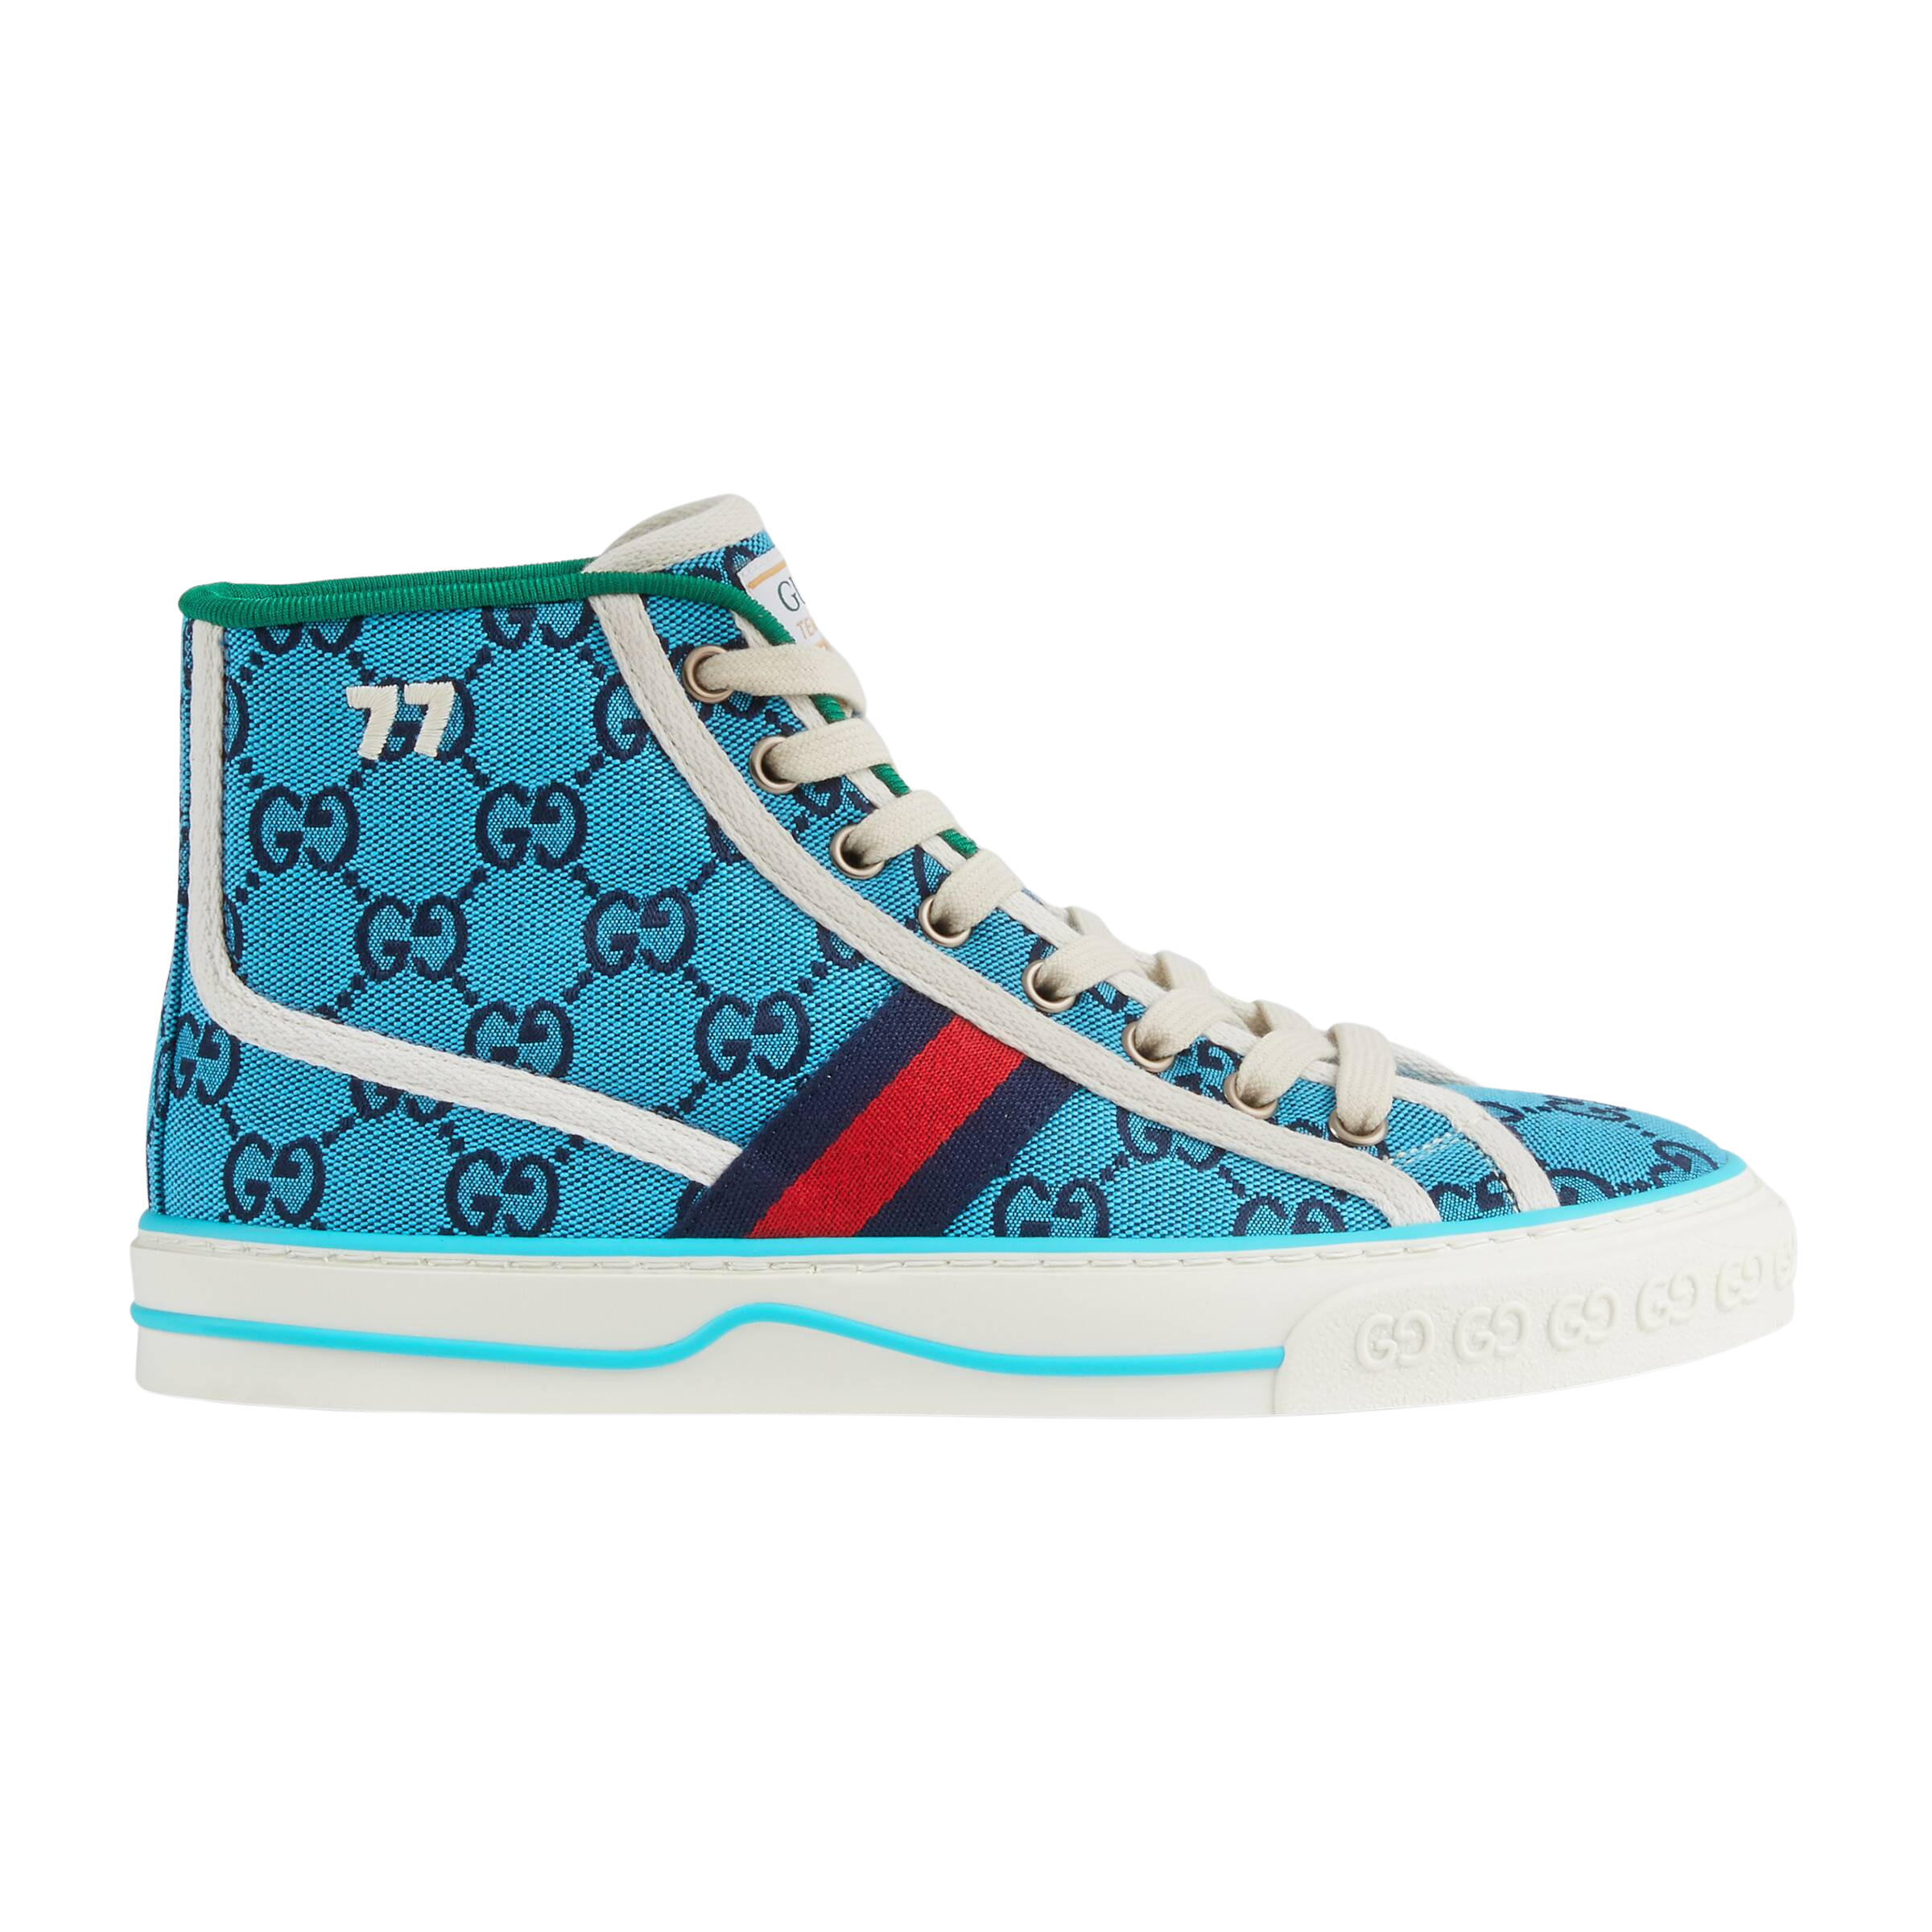 Gucci 1977 GG high-top sneakers